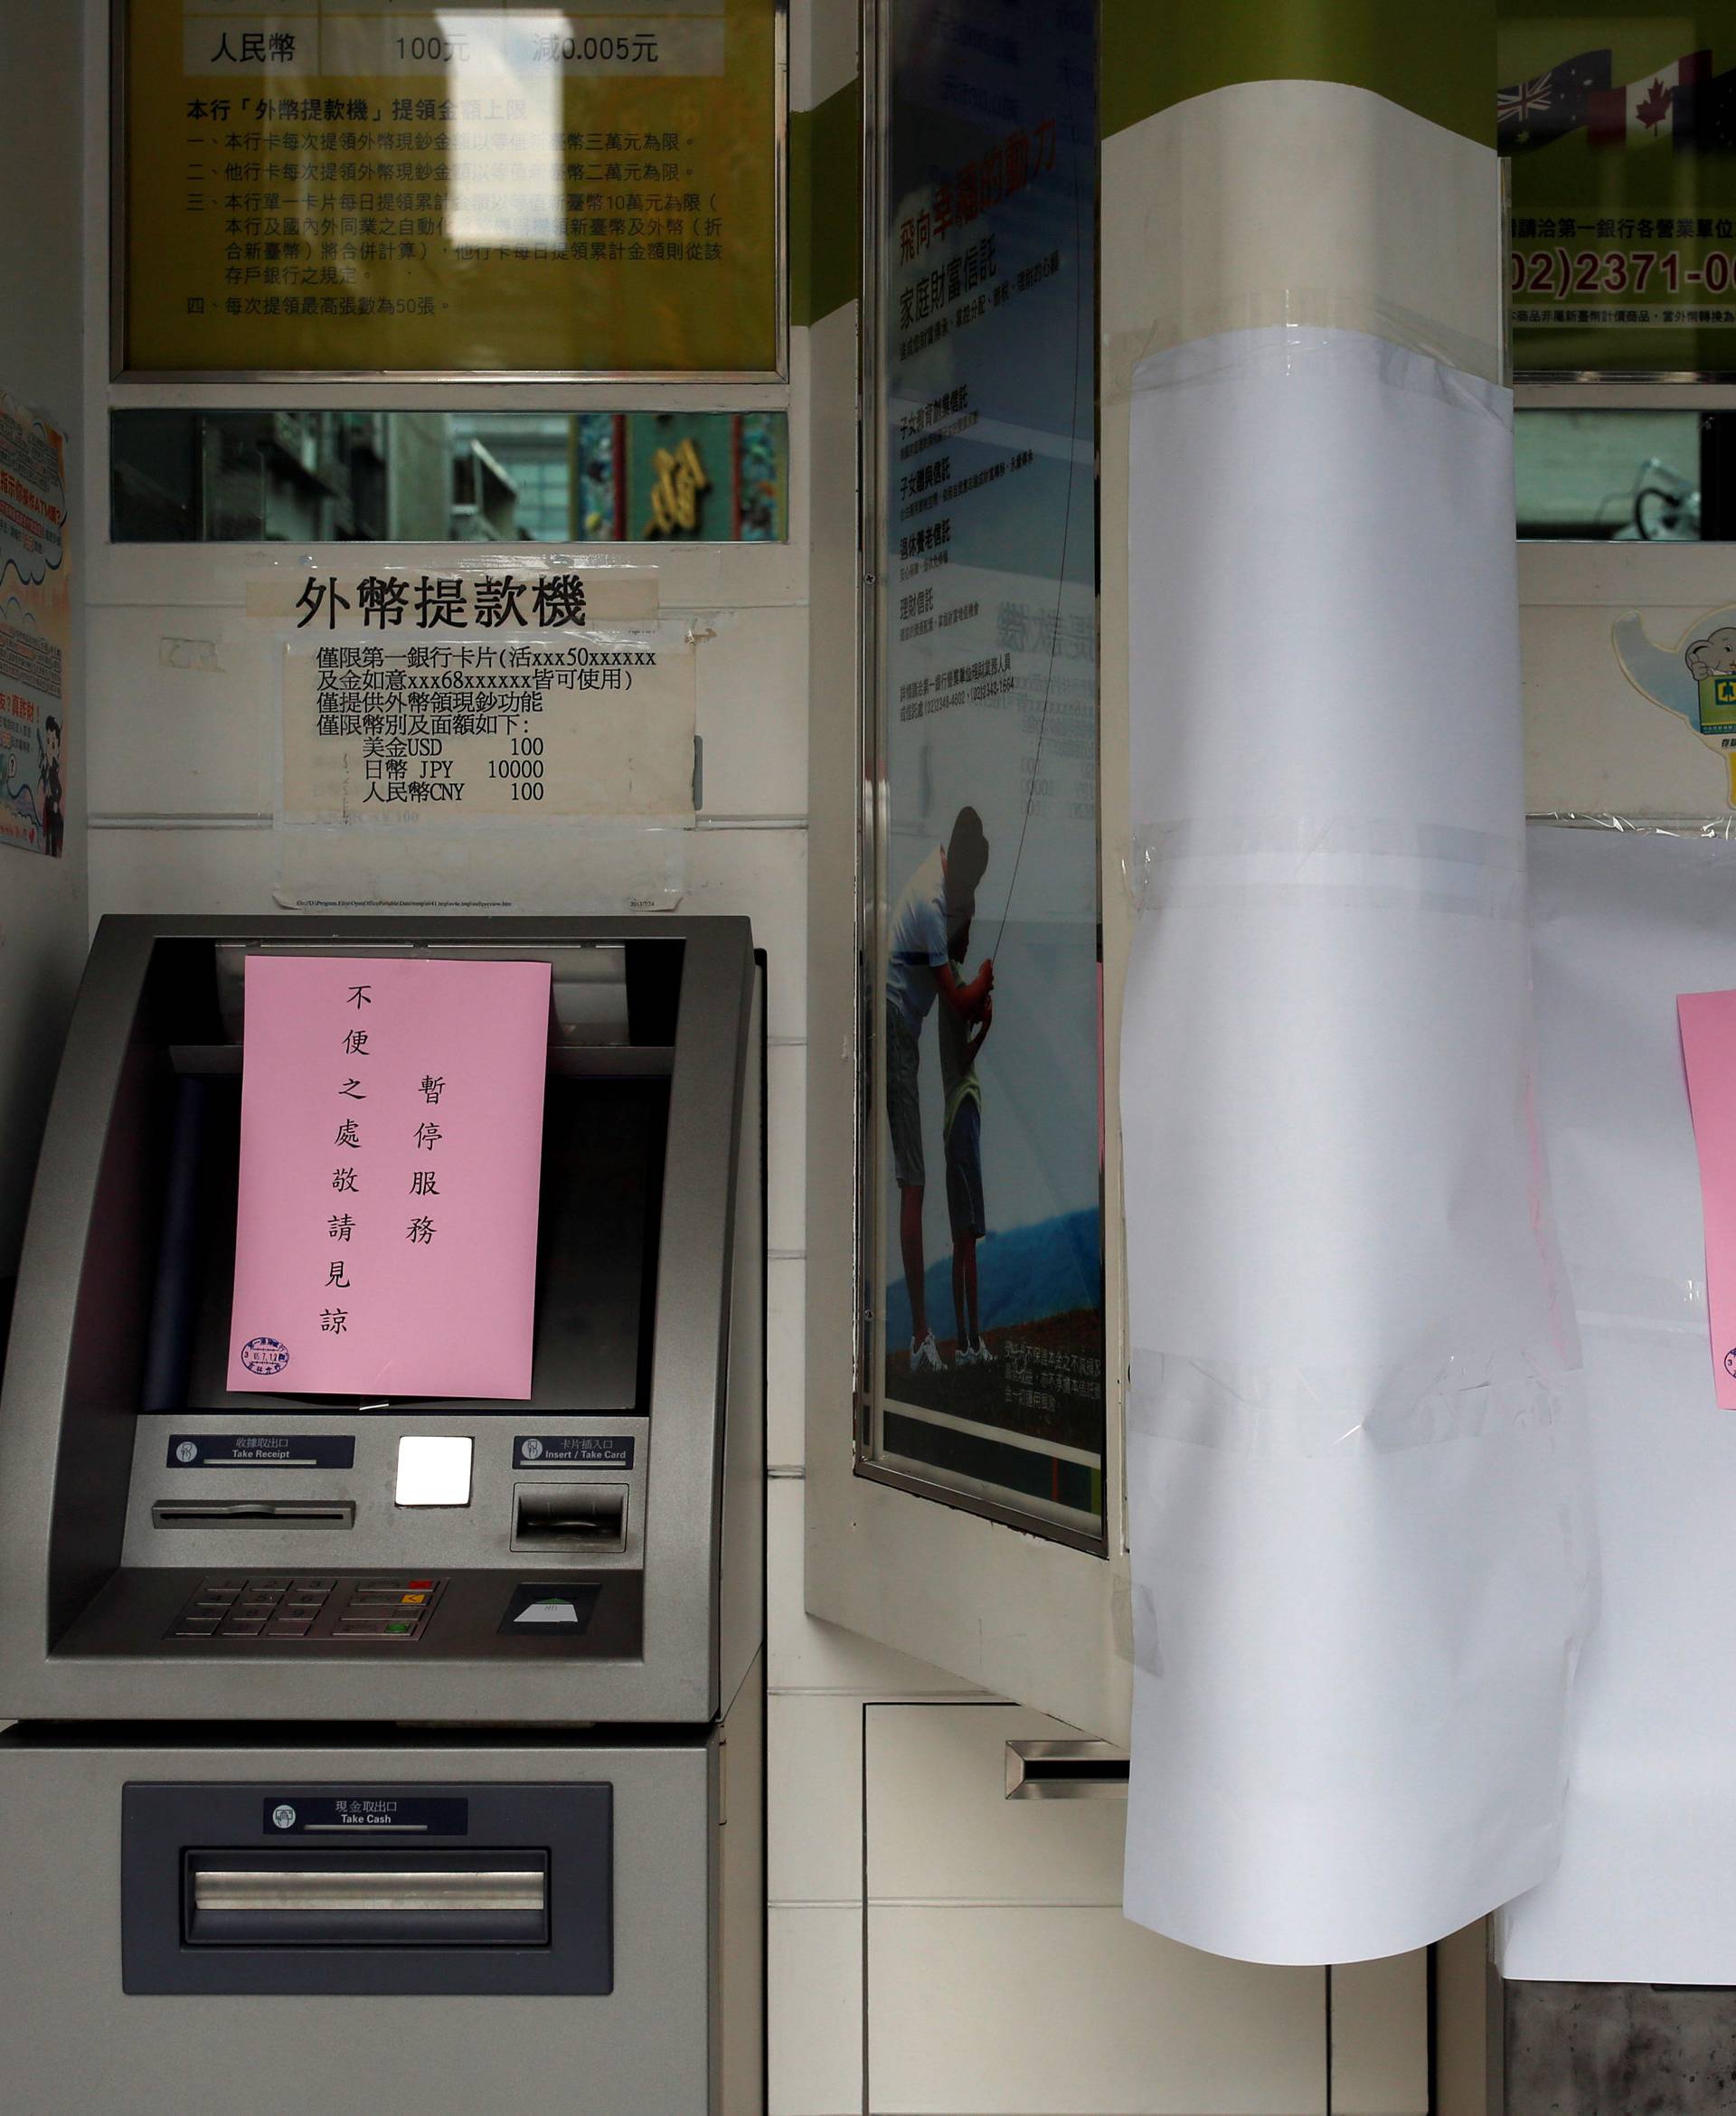 Taiwanese First Bank automated teller machines are seen suspended after T$70 million was reported stolen from its automated teller machines (ATM) in Taipei